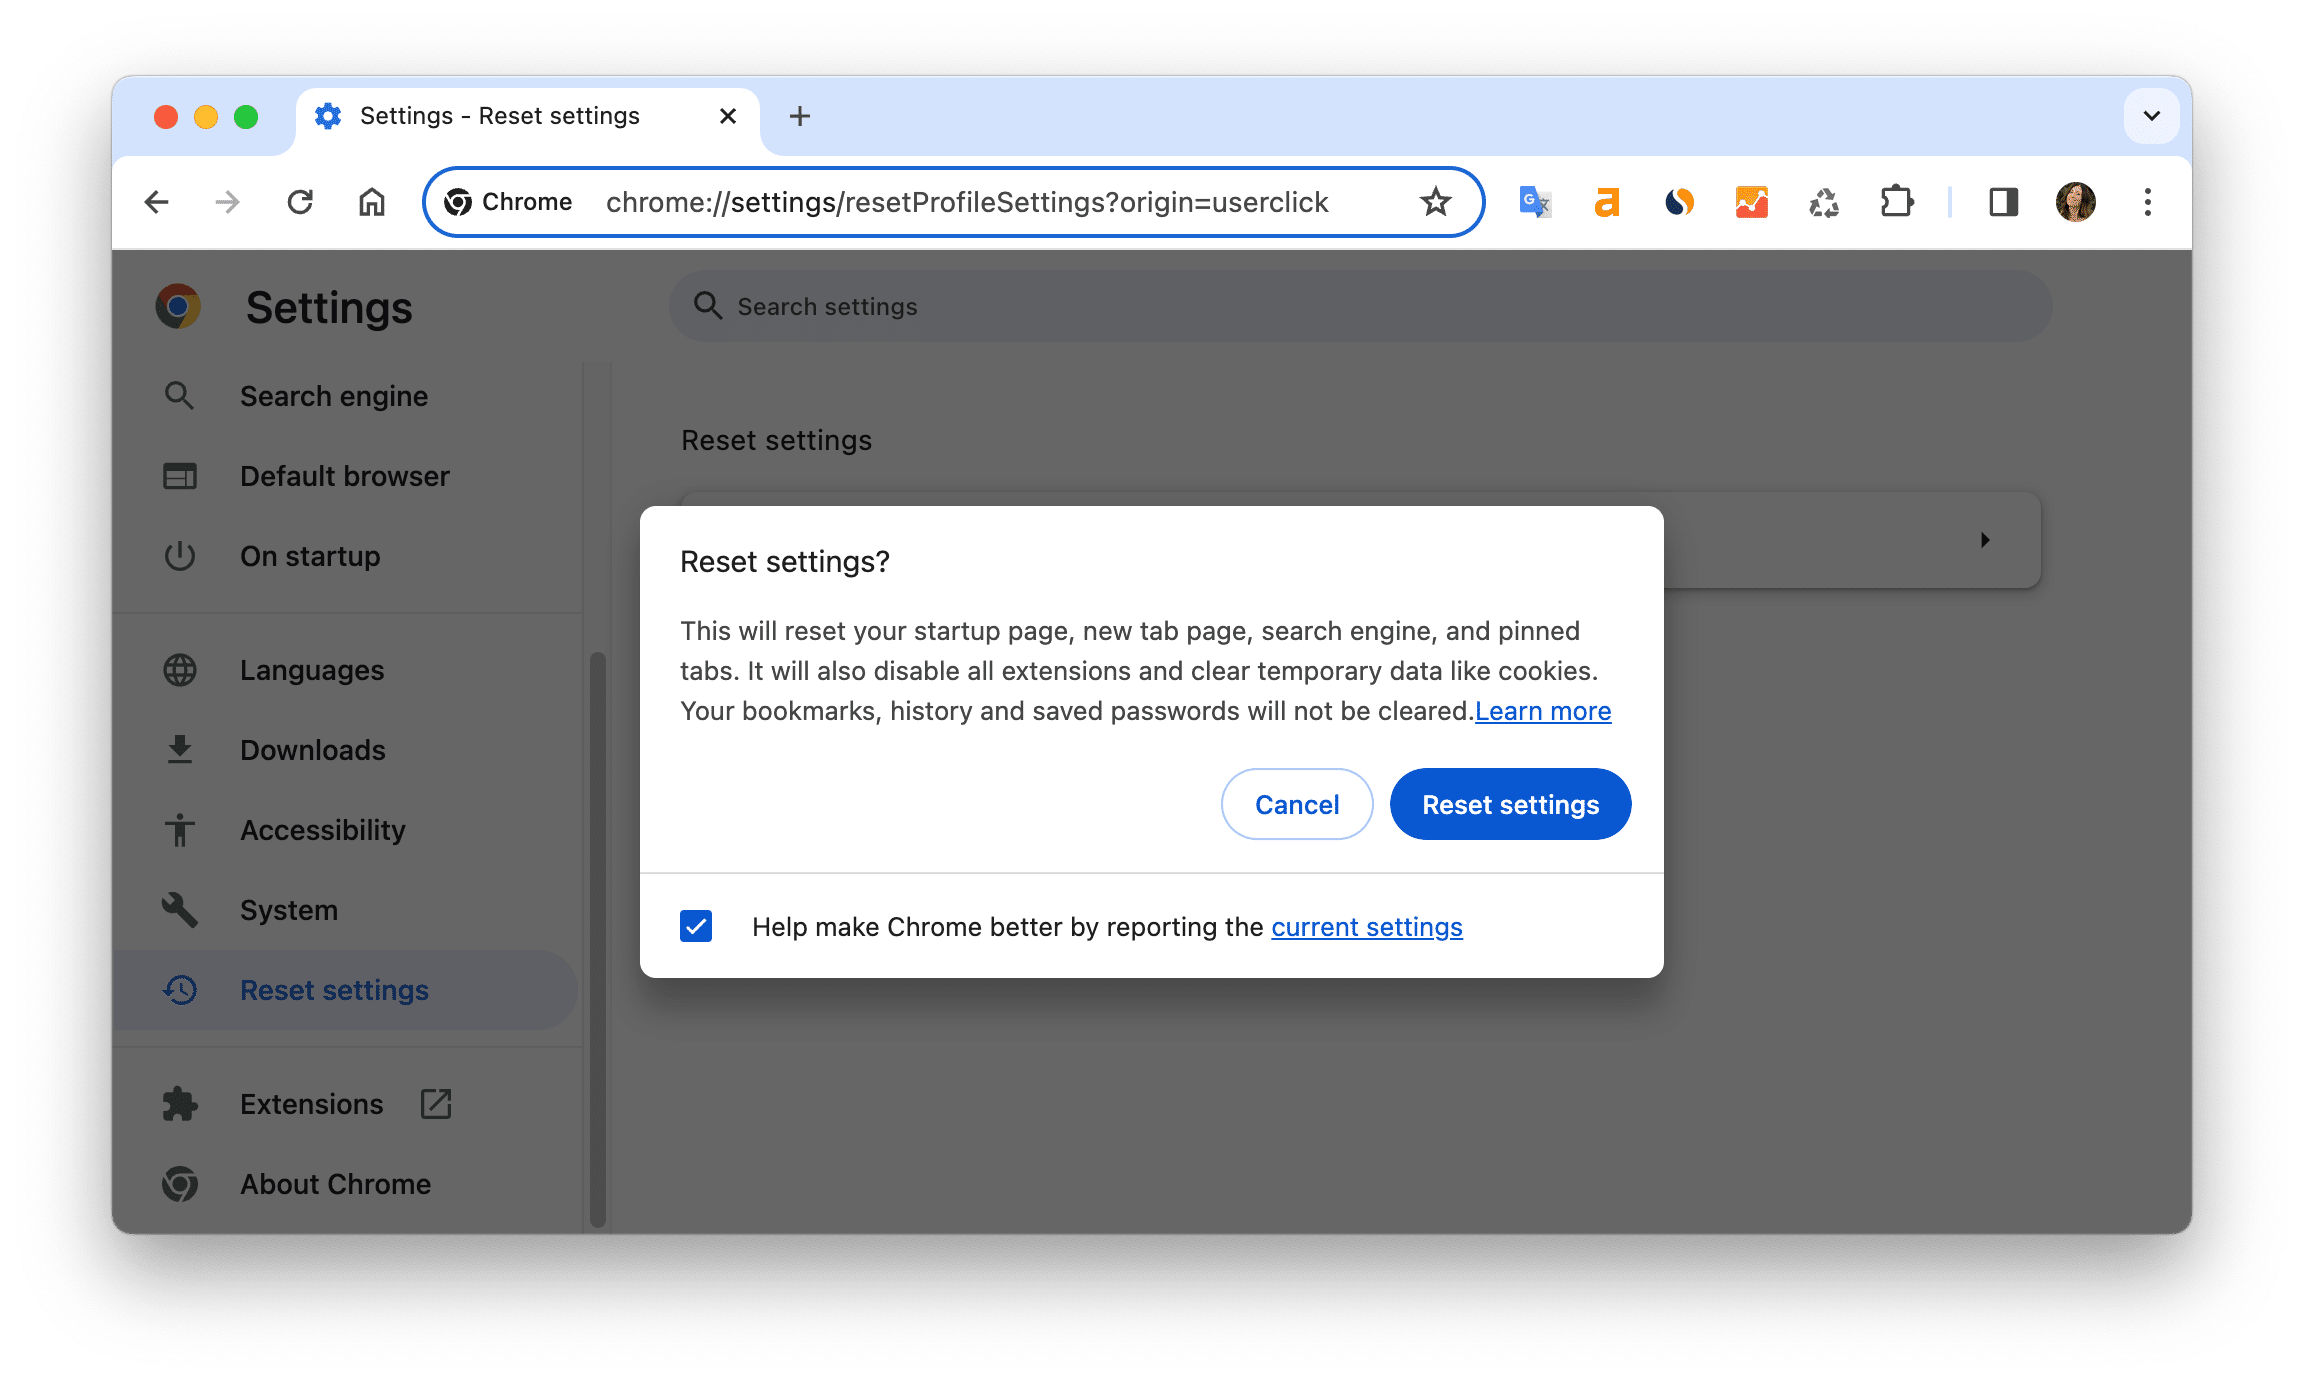 Chrome settings showing the button to Reset